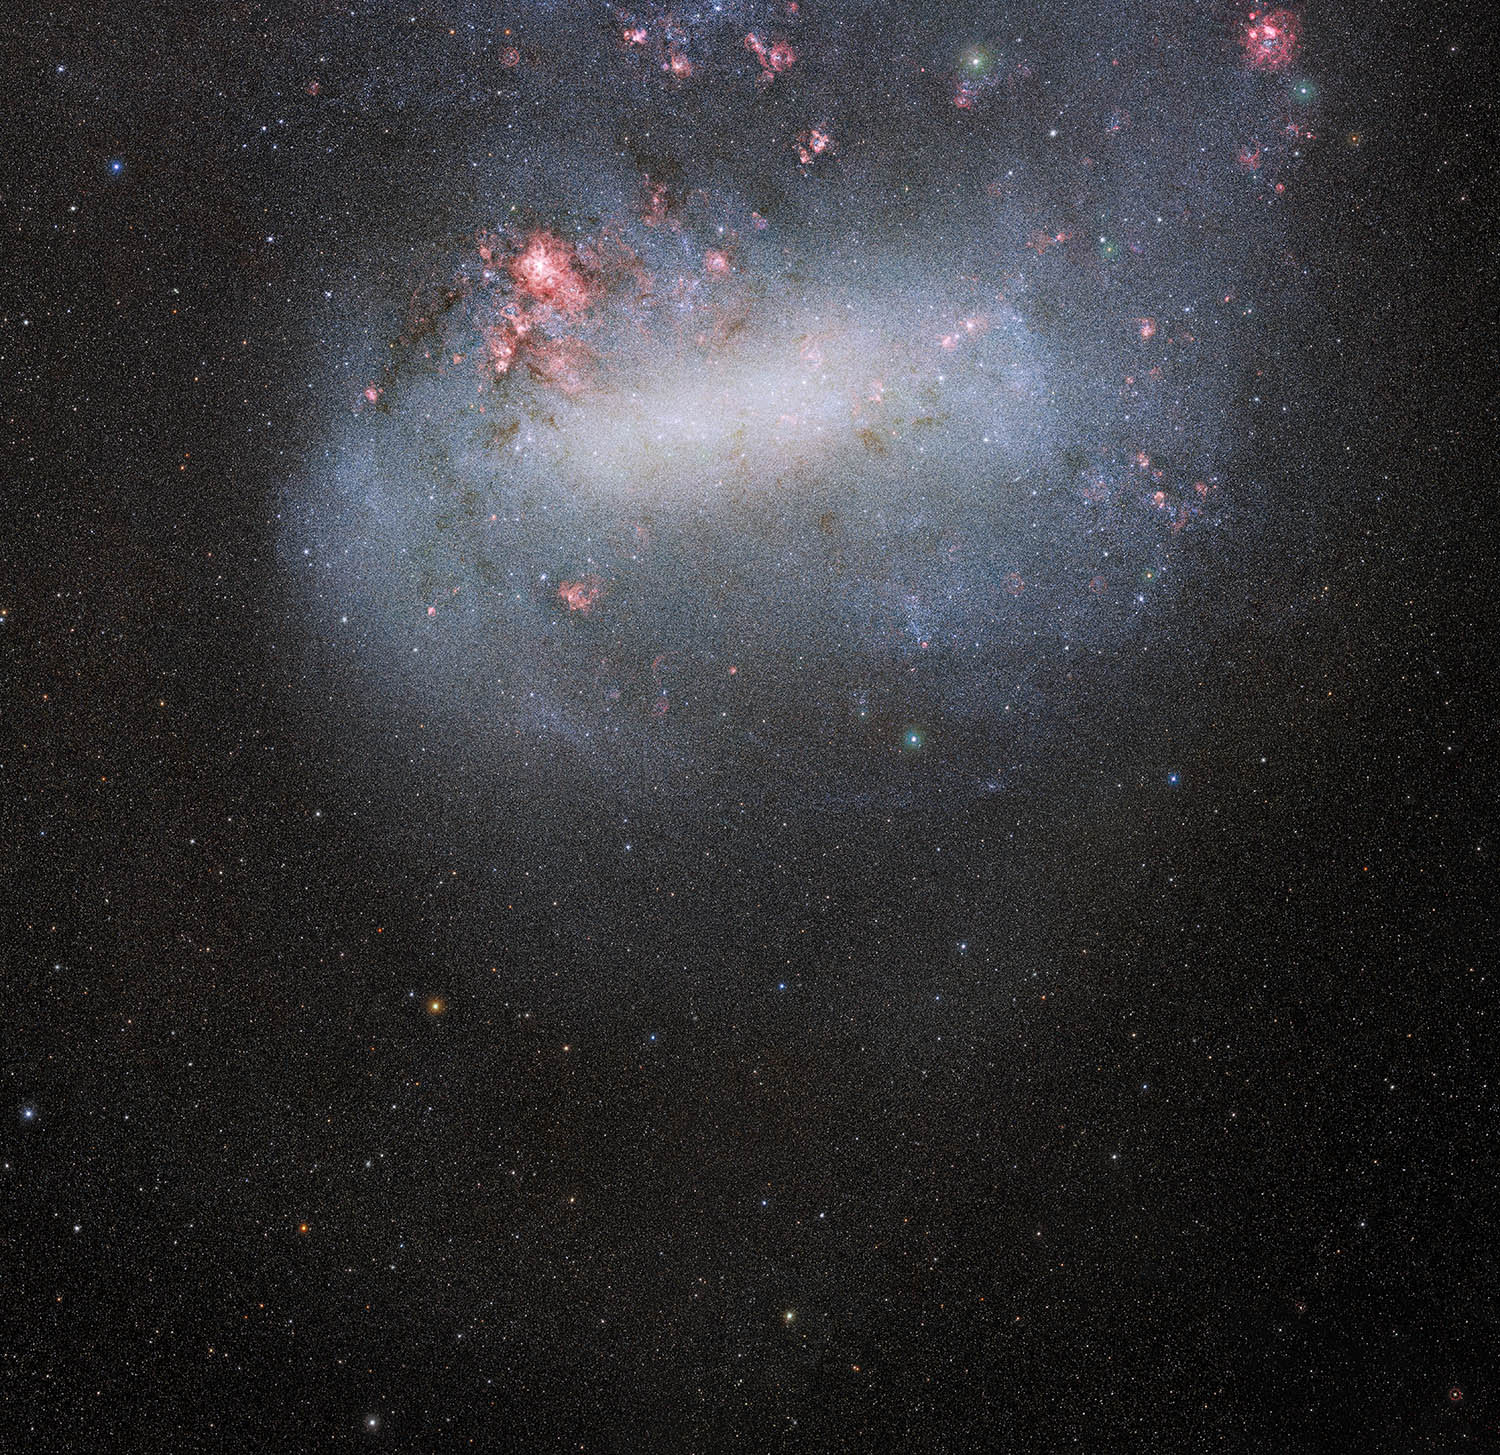 Part of the SMASH dataset showing an unprecedented wide-angle view of the Large Magellanic Cloud. The Large and Small Magellanic Clouds are the largest satellite galaxies of the Milky Way and, unlike the rest of the satellite galaxies, are still actively forming stars — and at a rapid pace. The depth of these survey data can be appreciated by the number of stars visible in the outer regions of the galaxy, as seen in the lower part of the image.